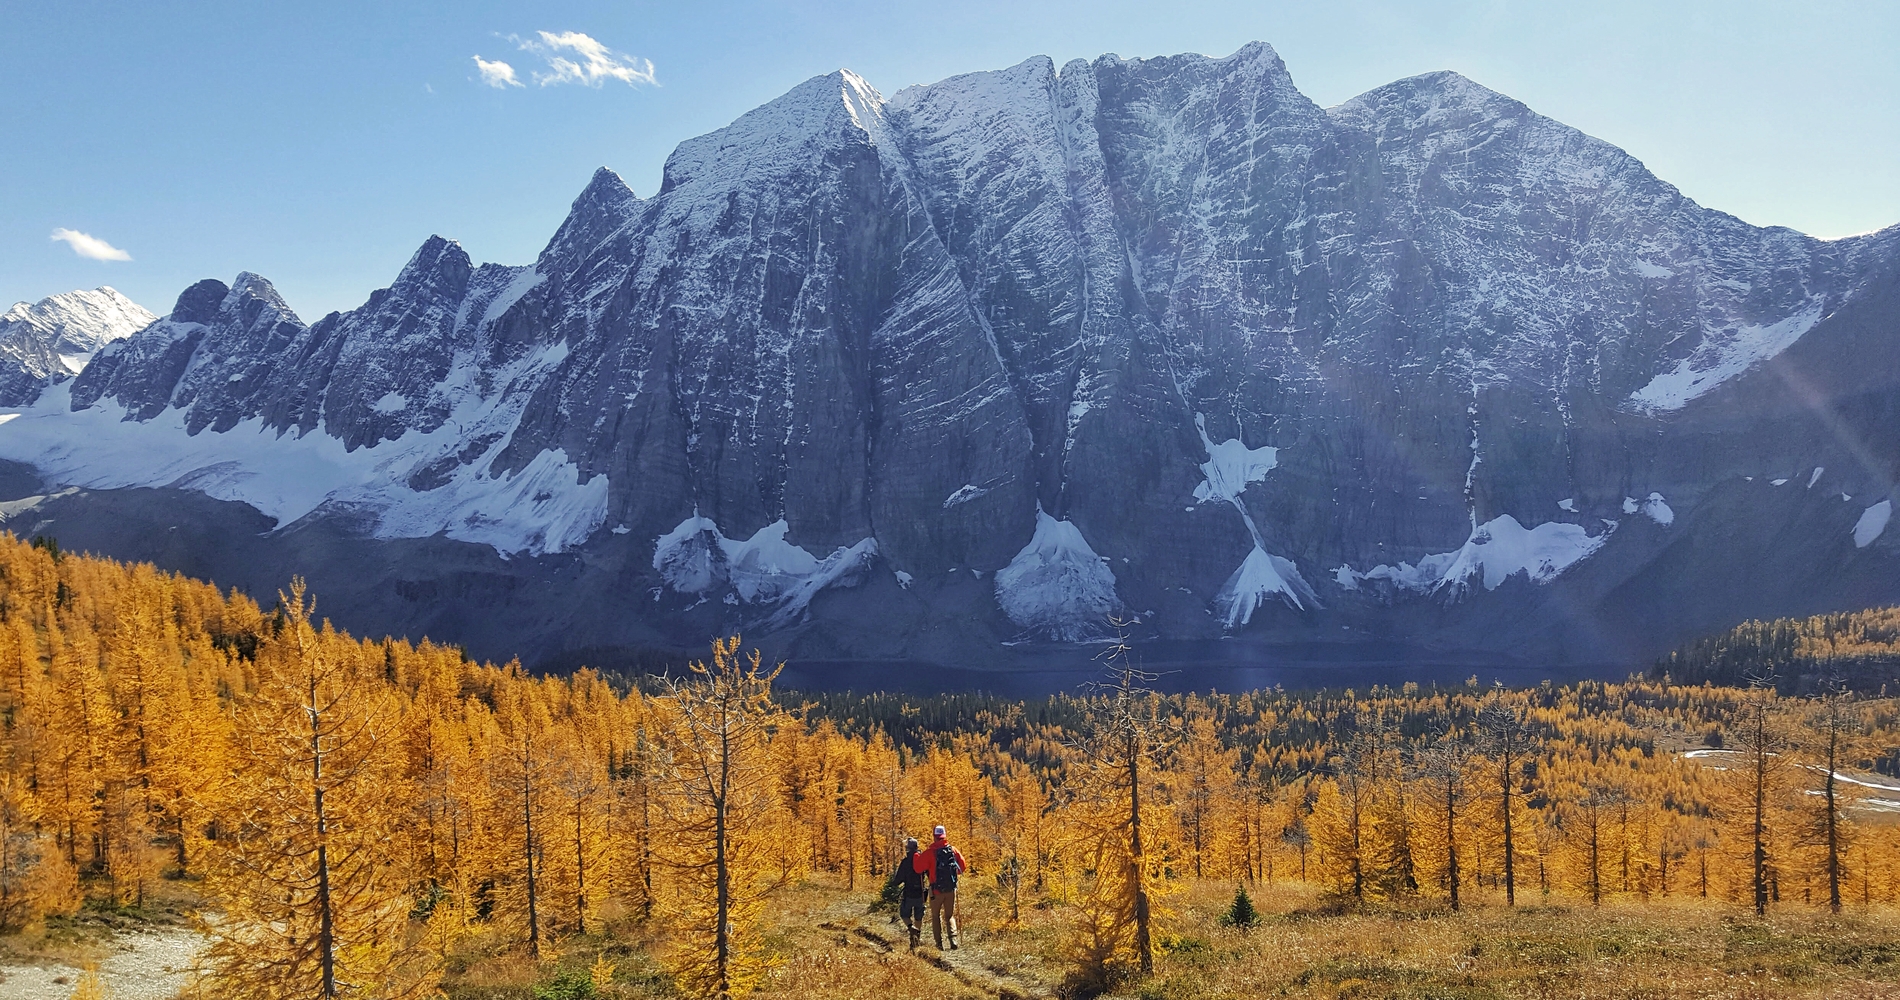 Hiking the Rockwall Trail in Kootenay National Park in fall with golden larch trees | Kristi Nicholson